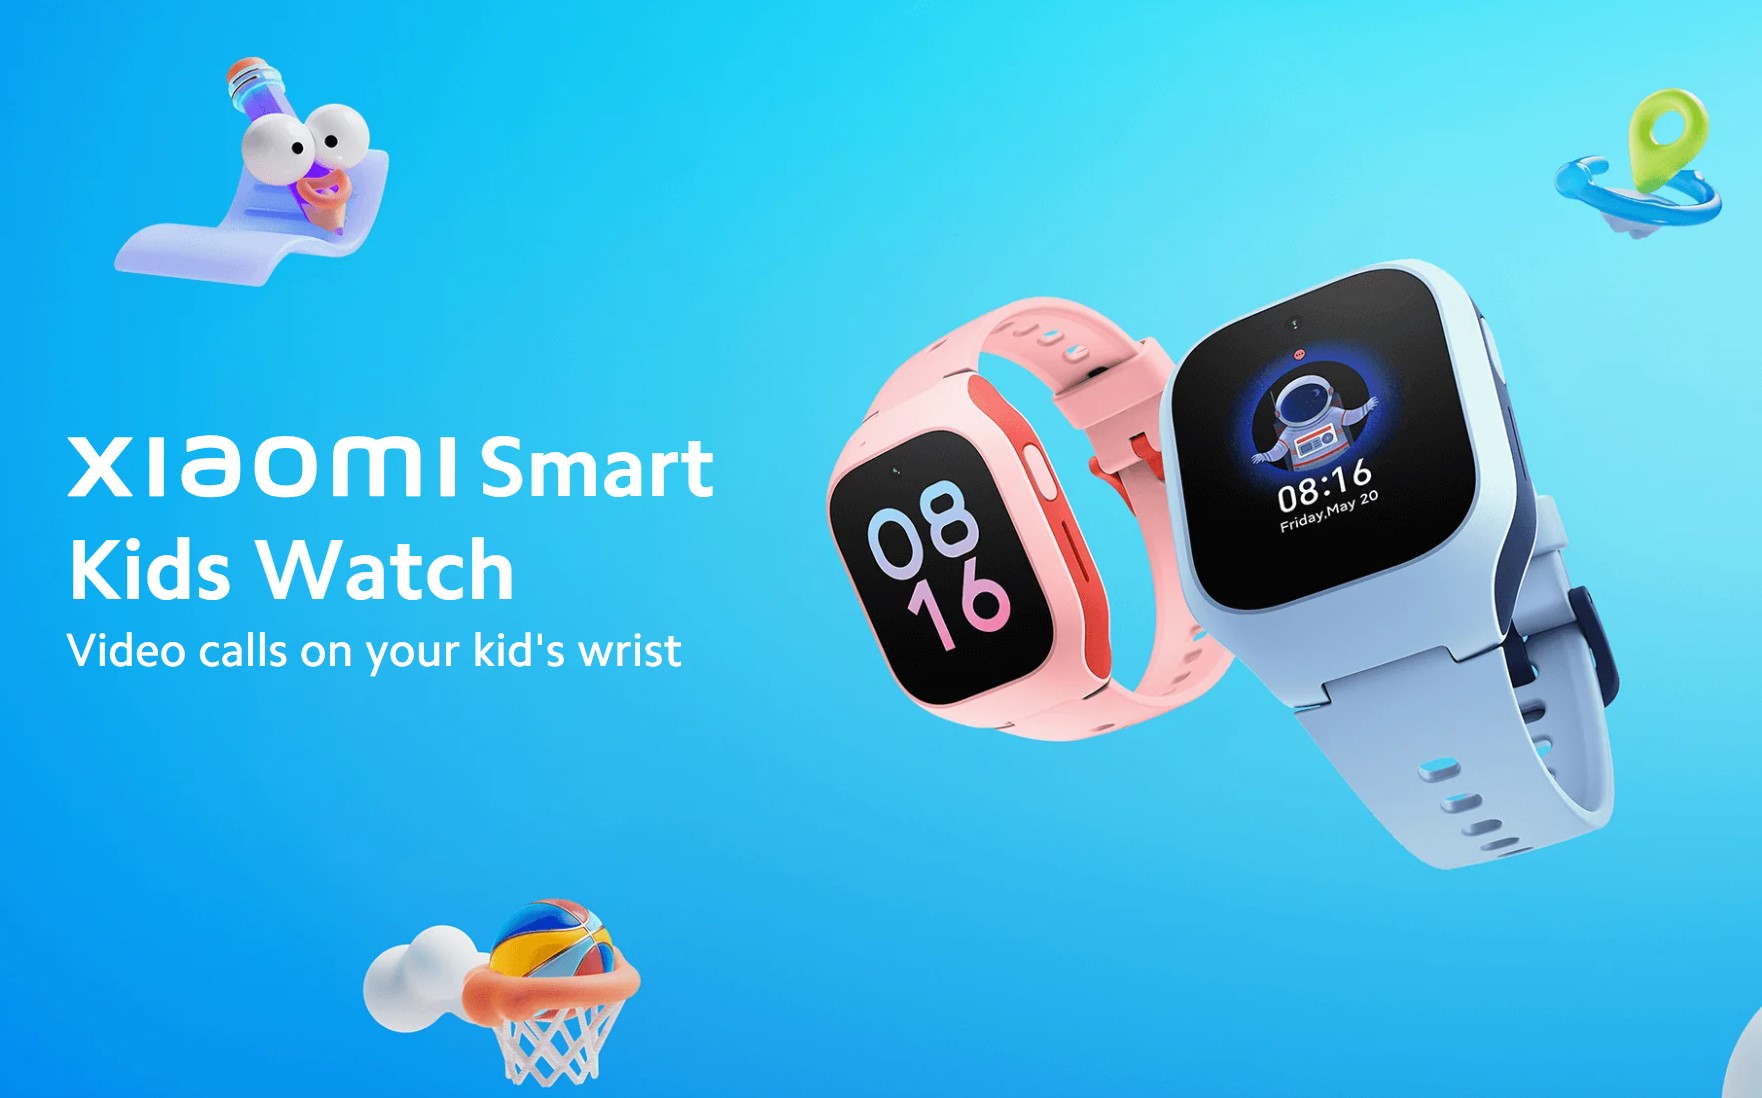 Xiaomi Smart Watch Kids, Now Available in the Philippines